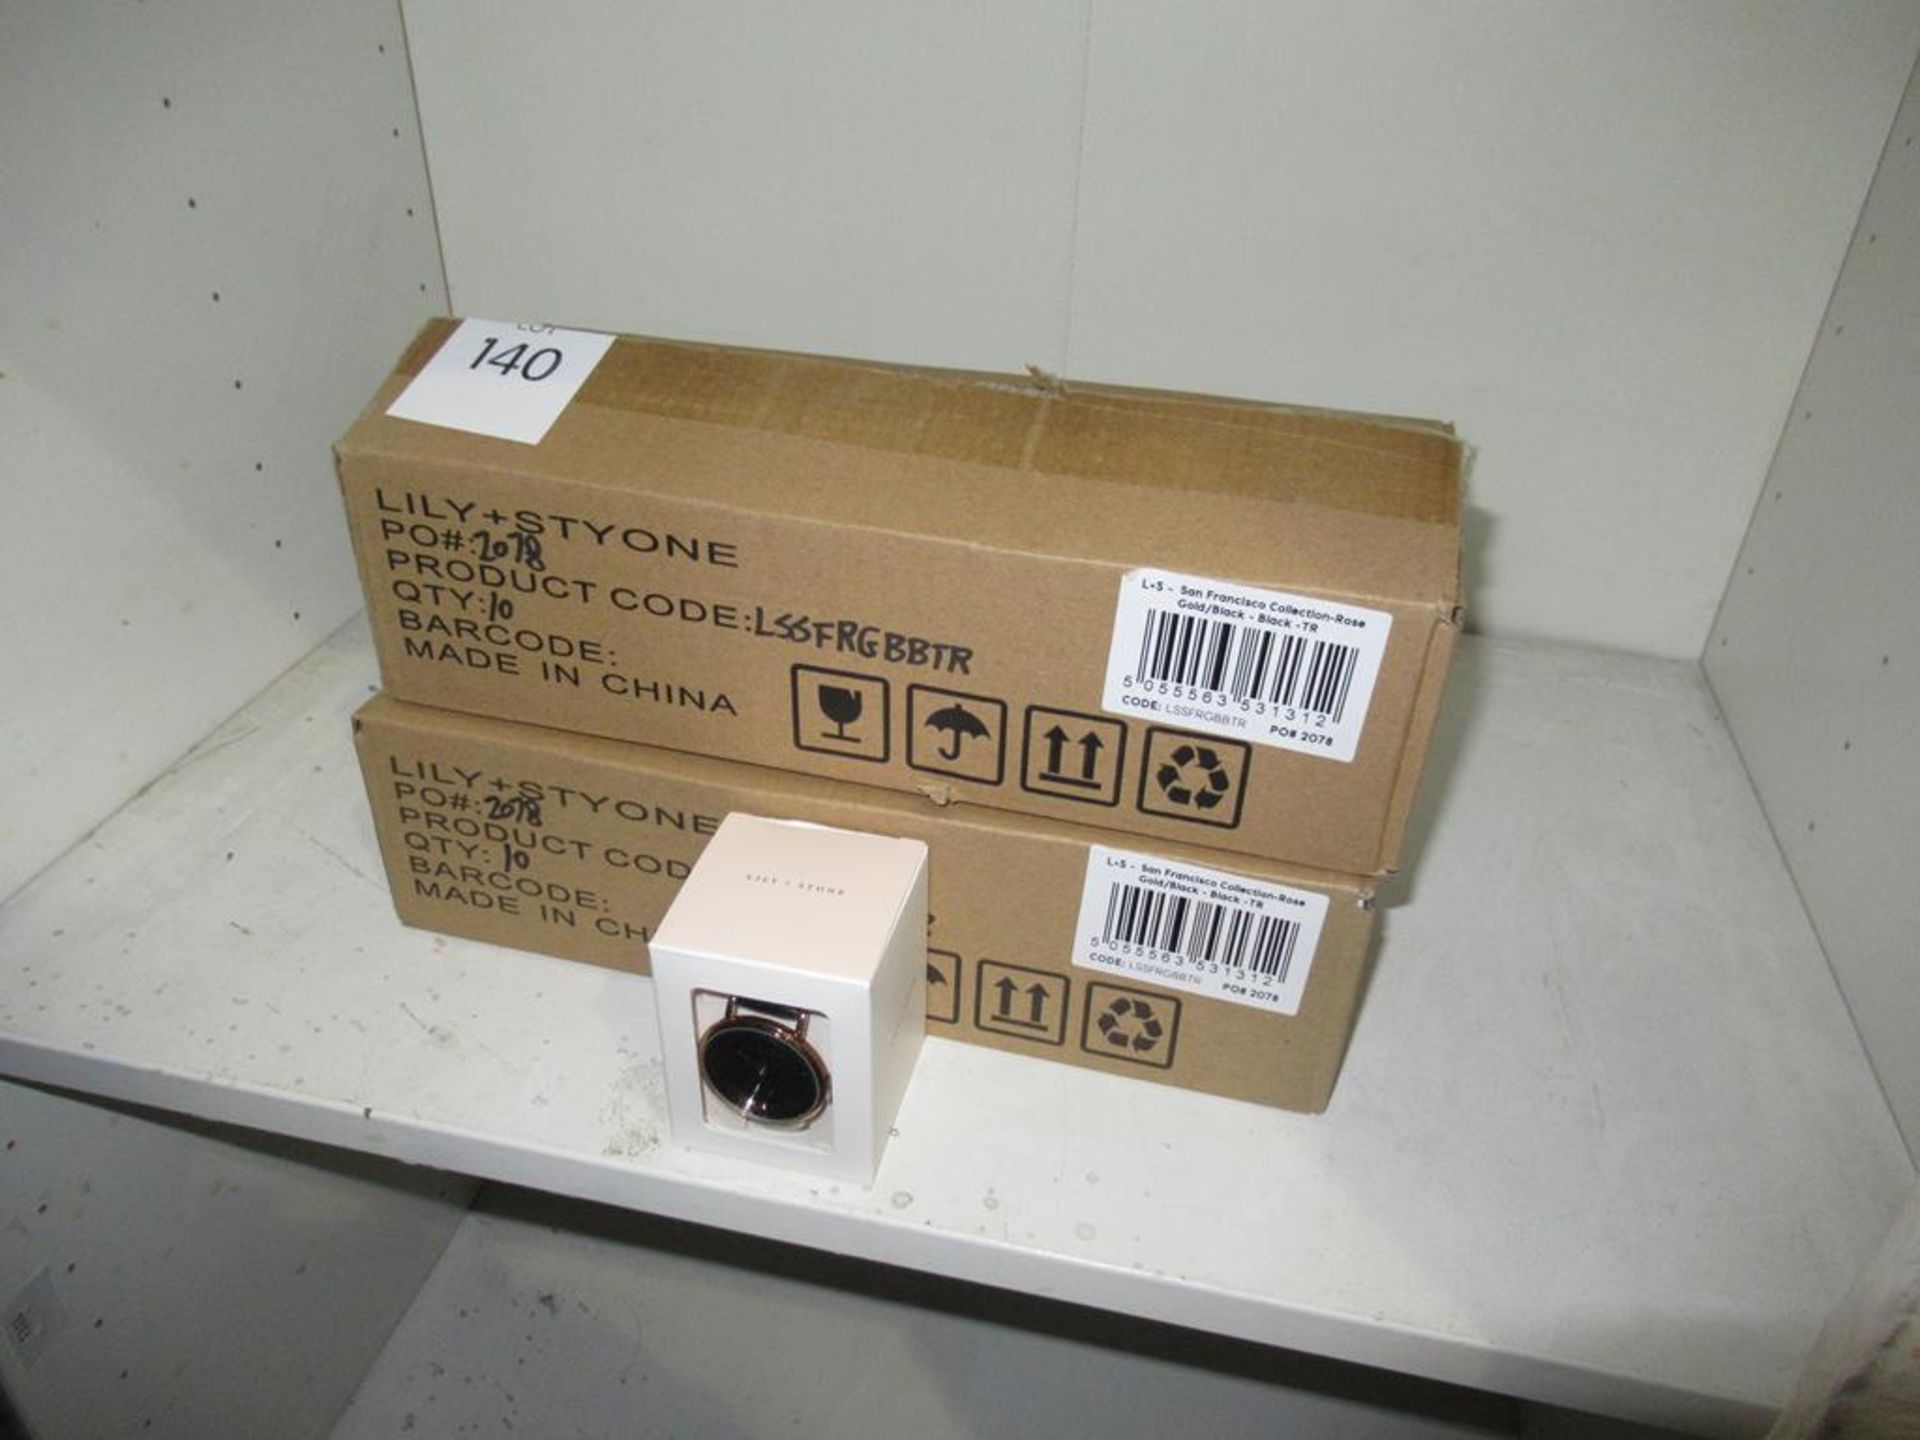 2x boxes of Lily and Stone 'San Francisco' watches- unopened (20) total approx. RP £540 - Image 3 of 3